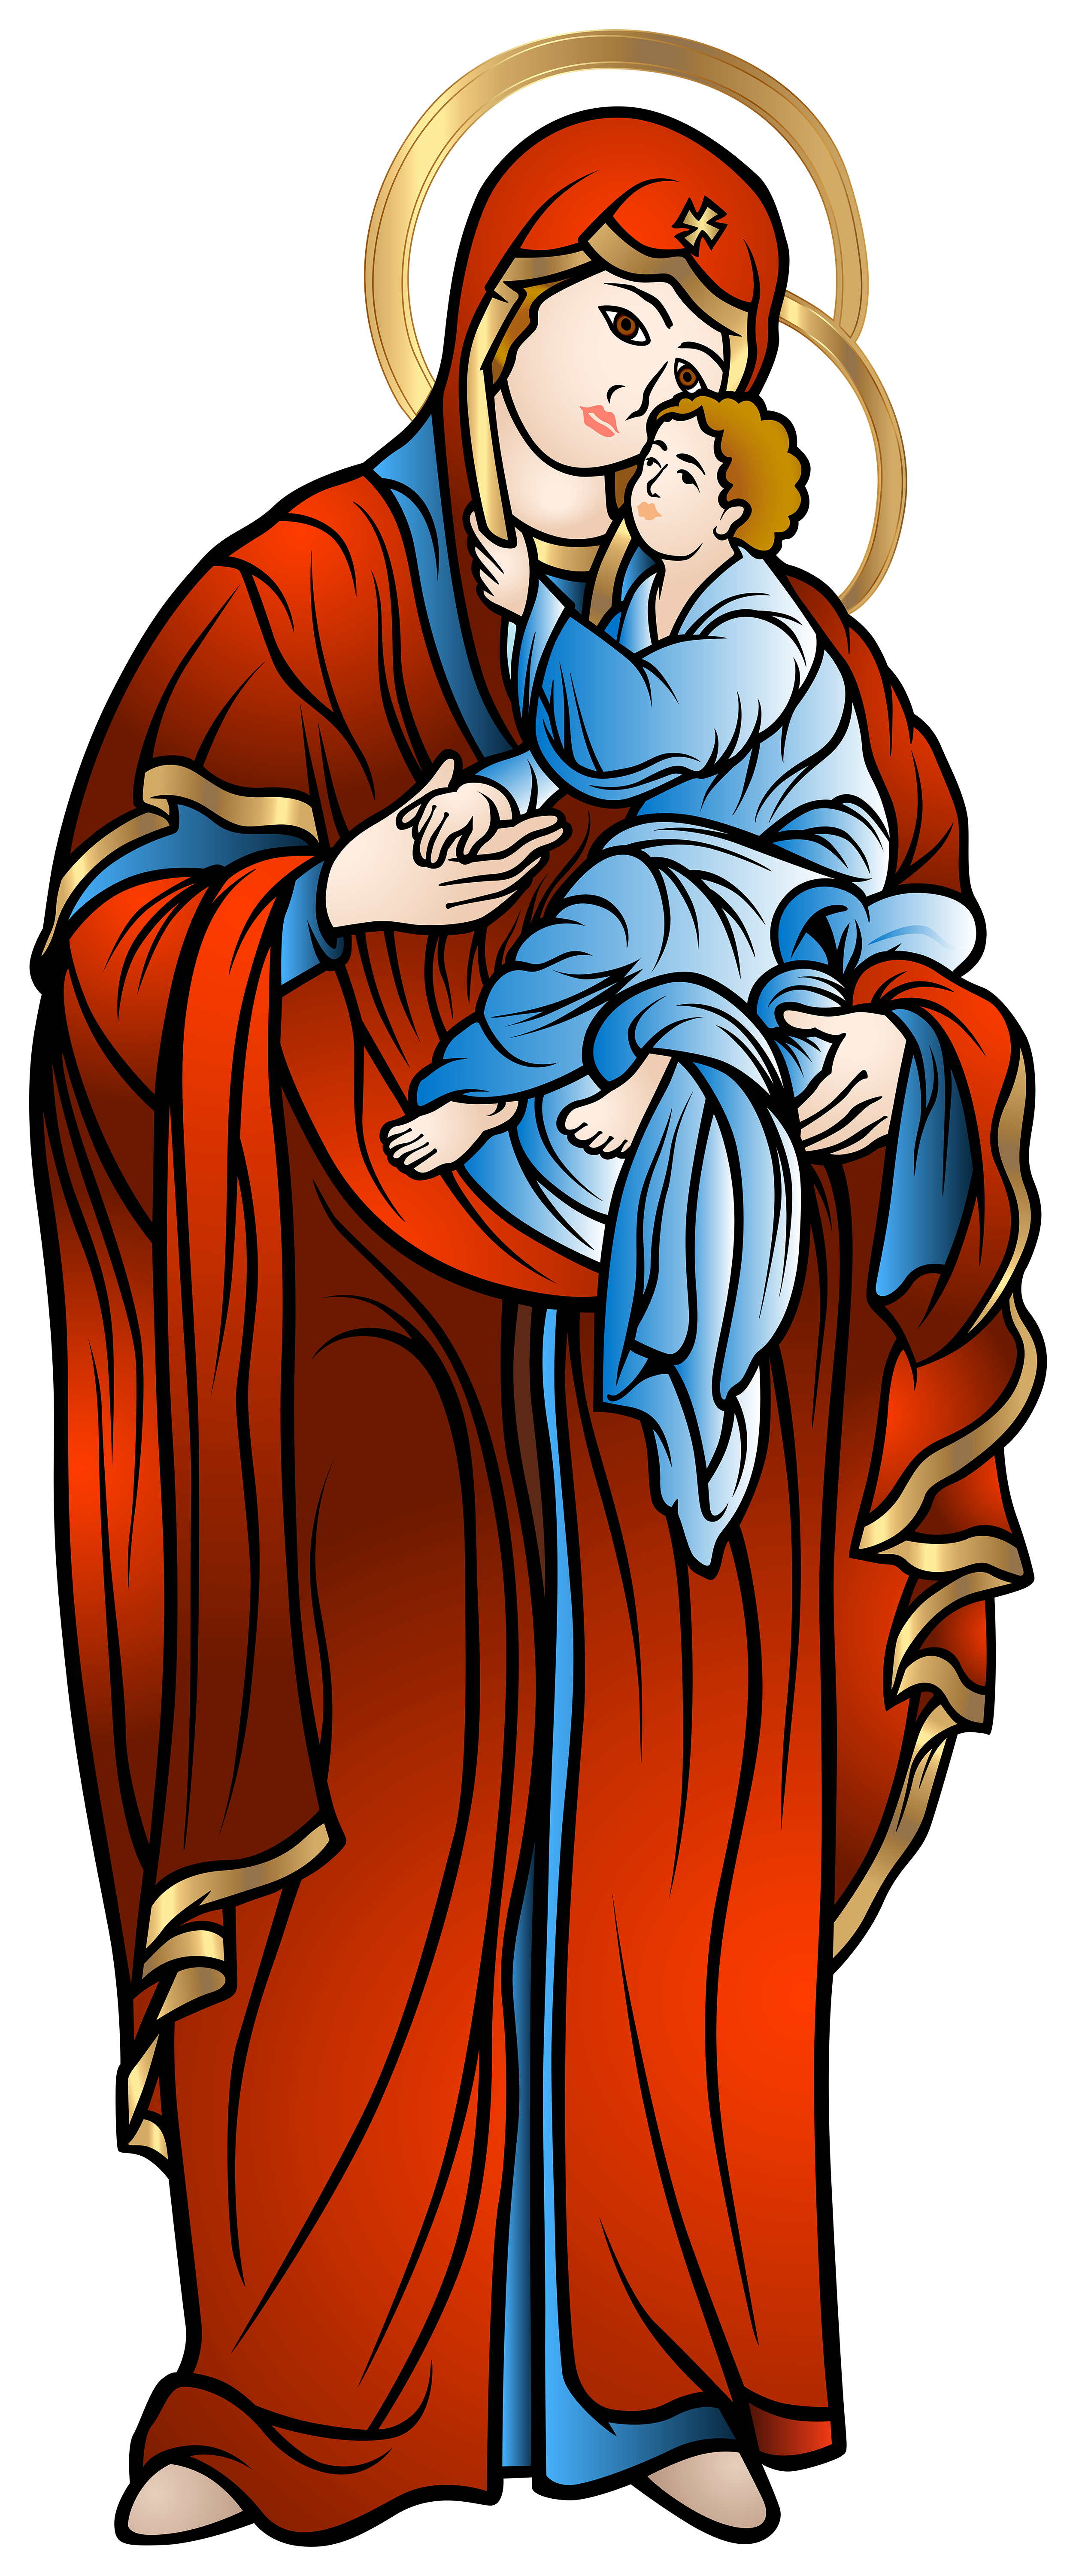 free clipart images virgin mary - photo #44